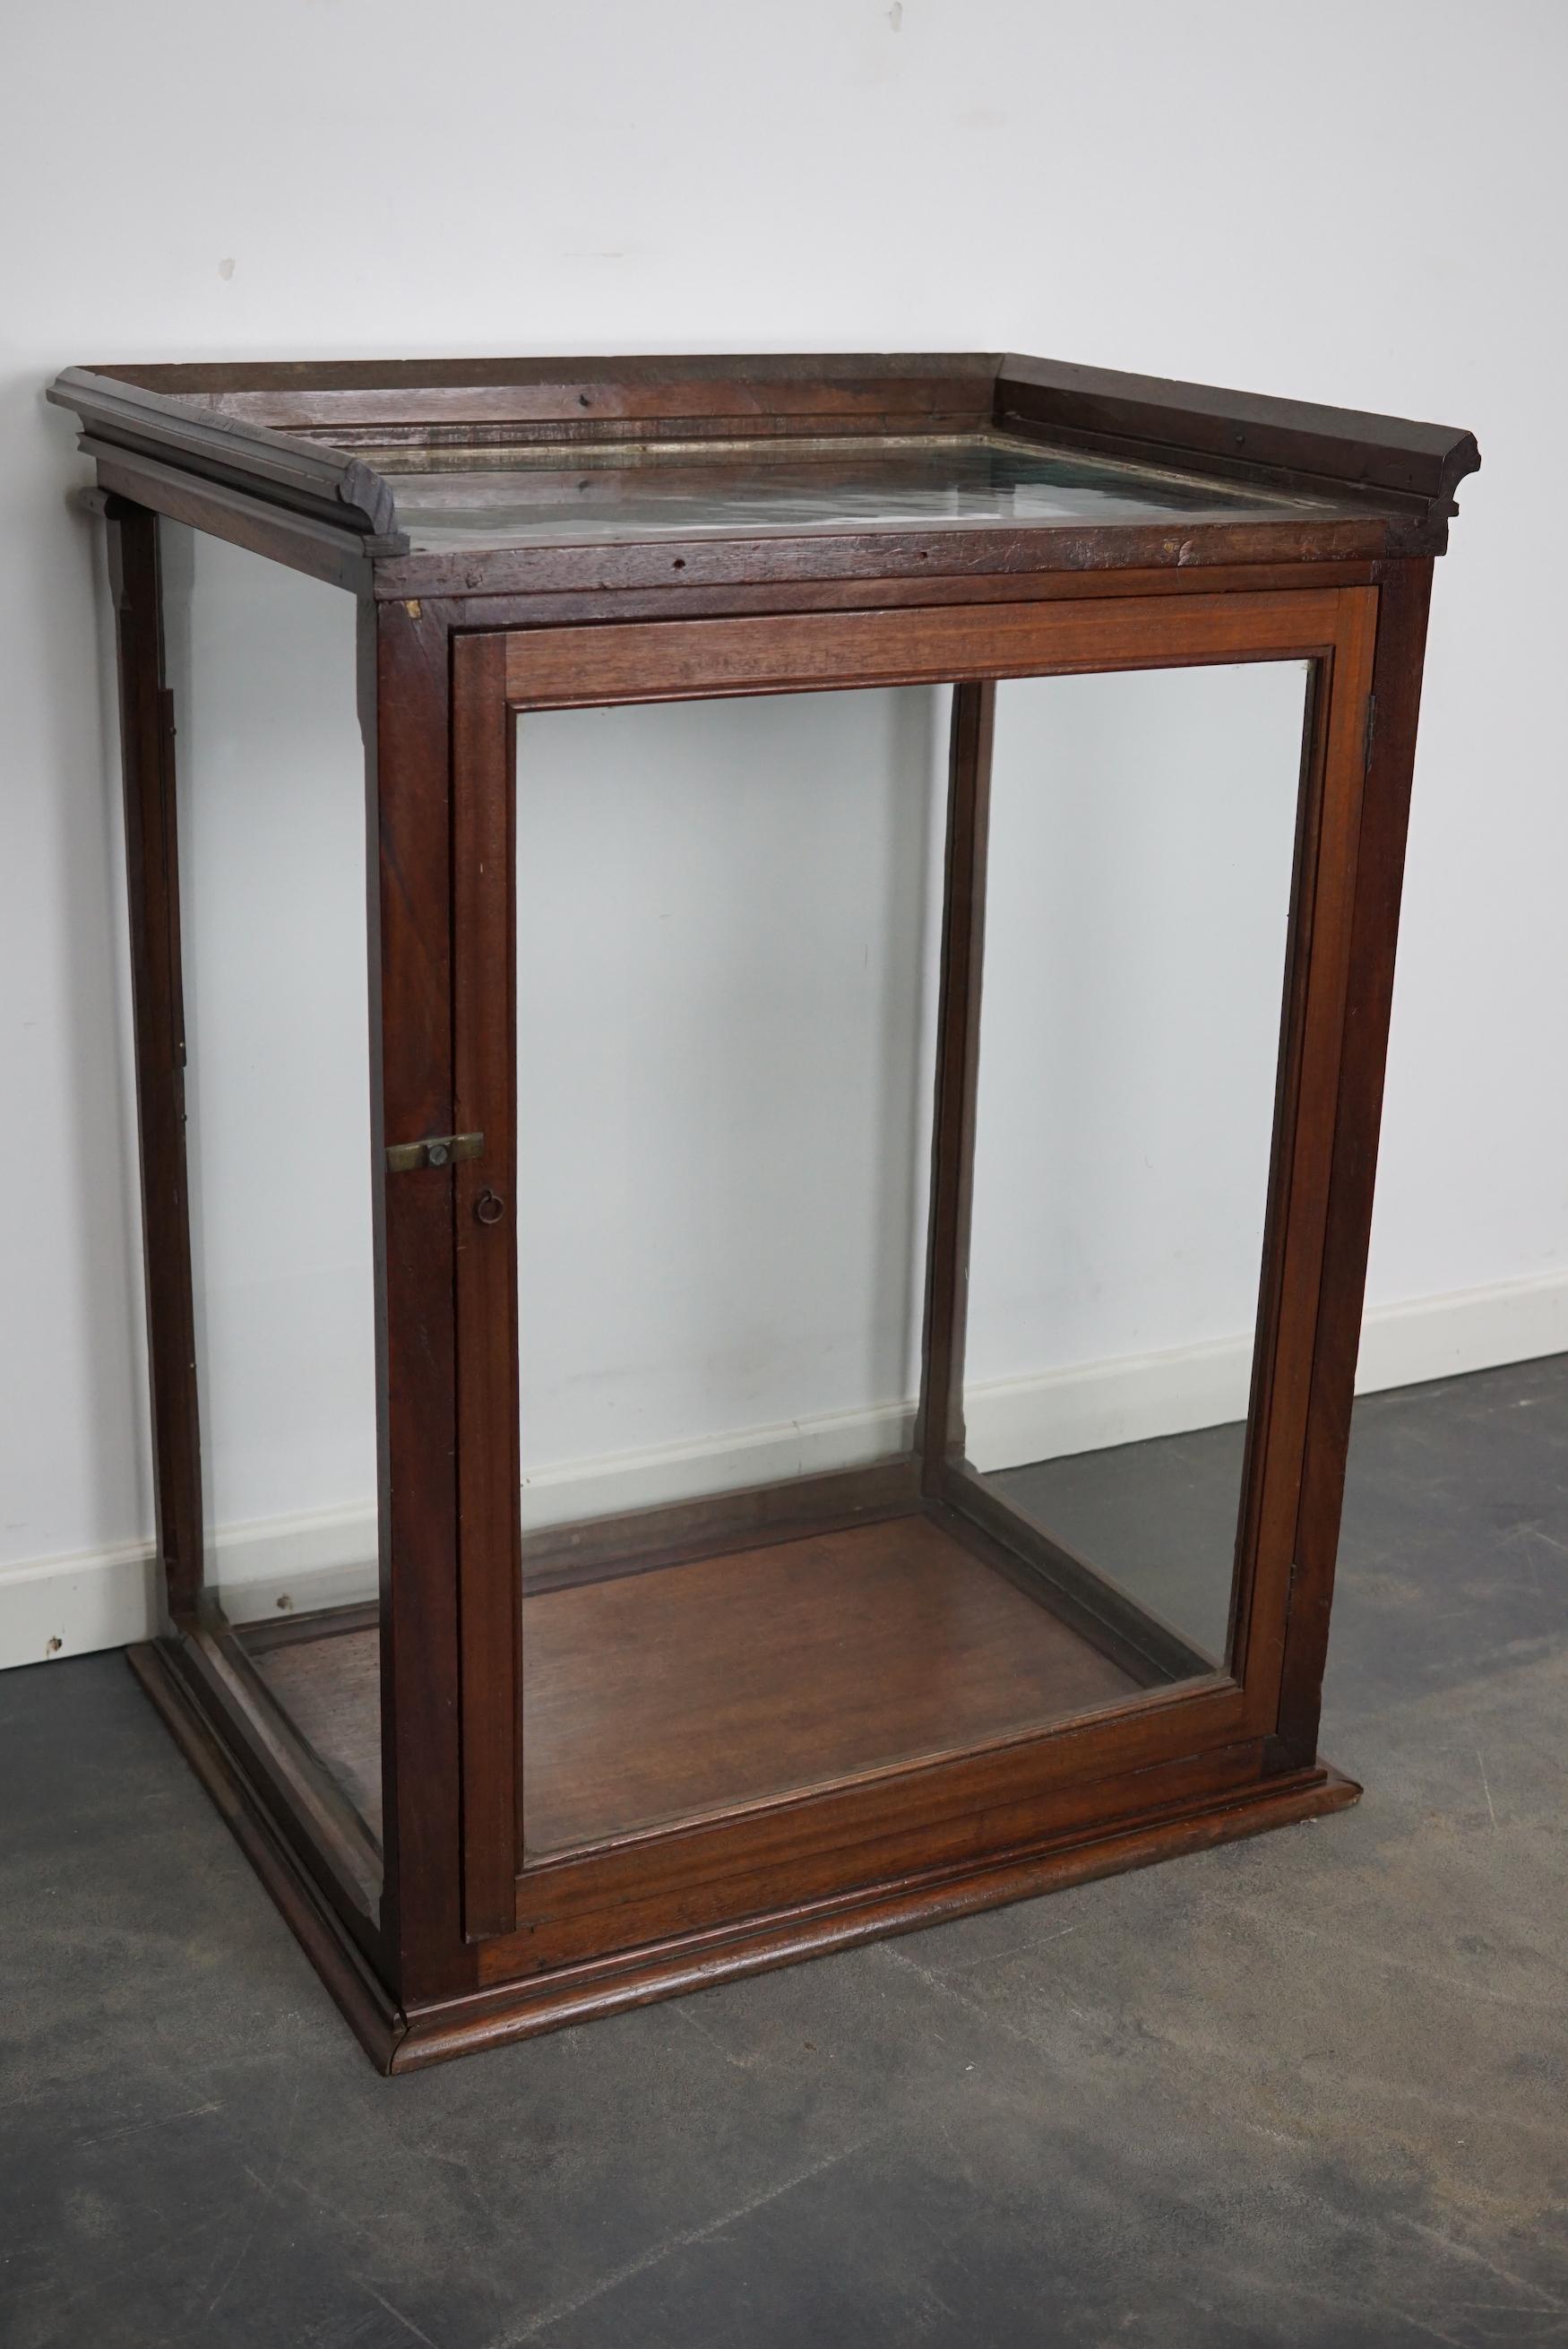 Victorian Mahogany Museum / Shop Display Cabinet or Vitrine, Late 19th Century For Sale 3